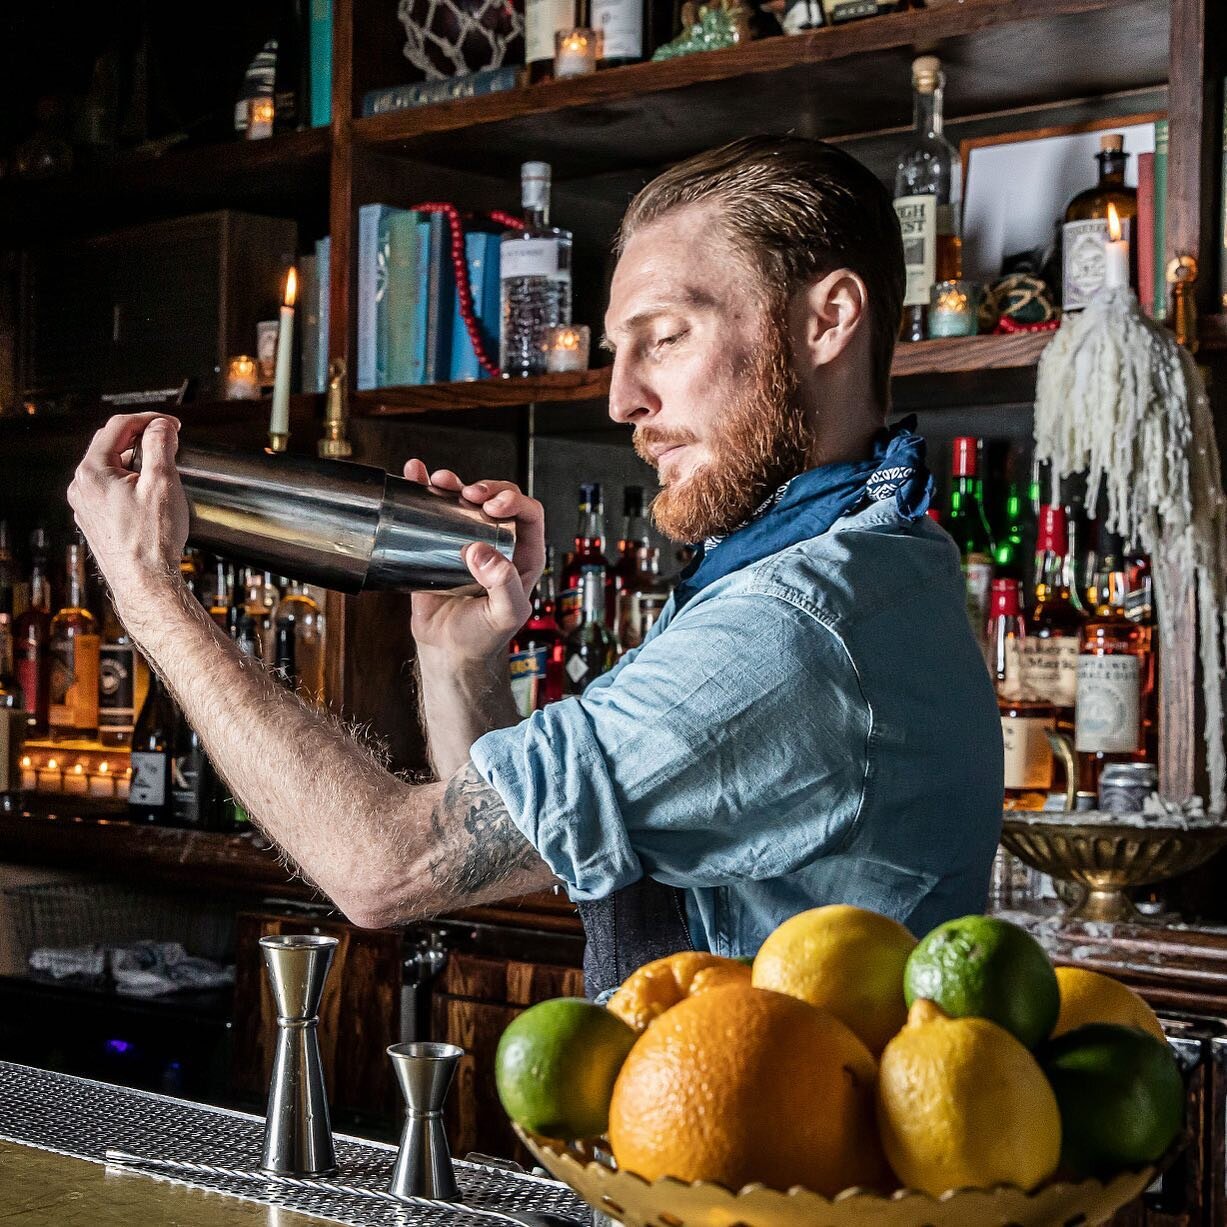 Patrick doing his thing
Via @punch_drink